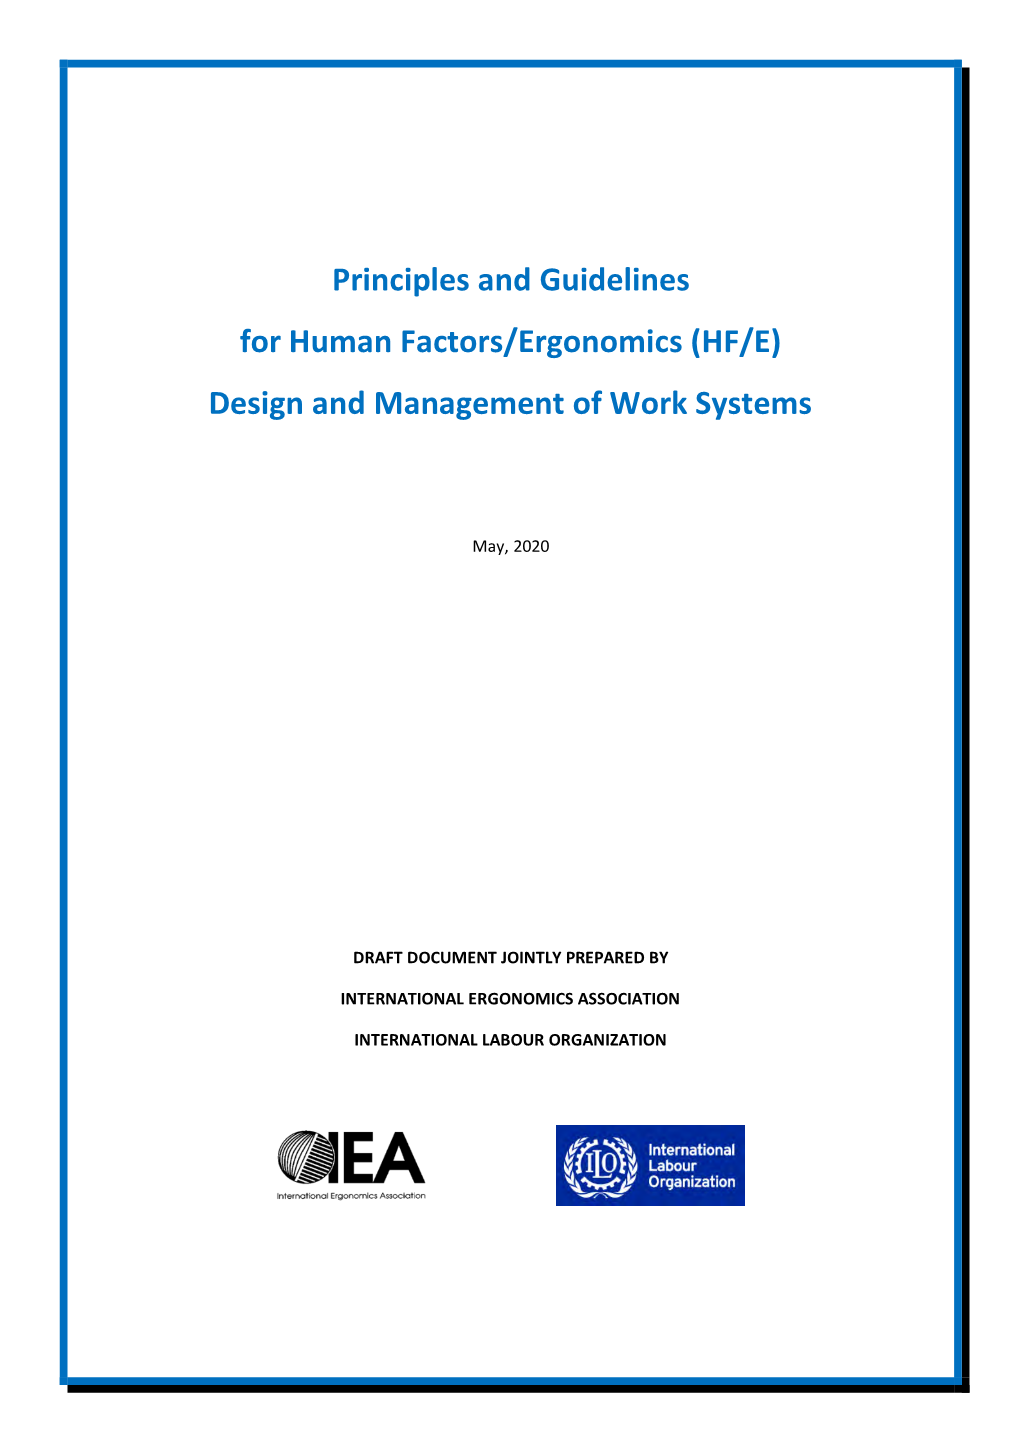 Principles and Guidelines for Human Factors/Ergonomics (HF/E) Design and Management of Work Systems